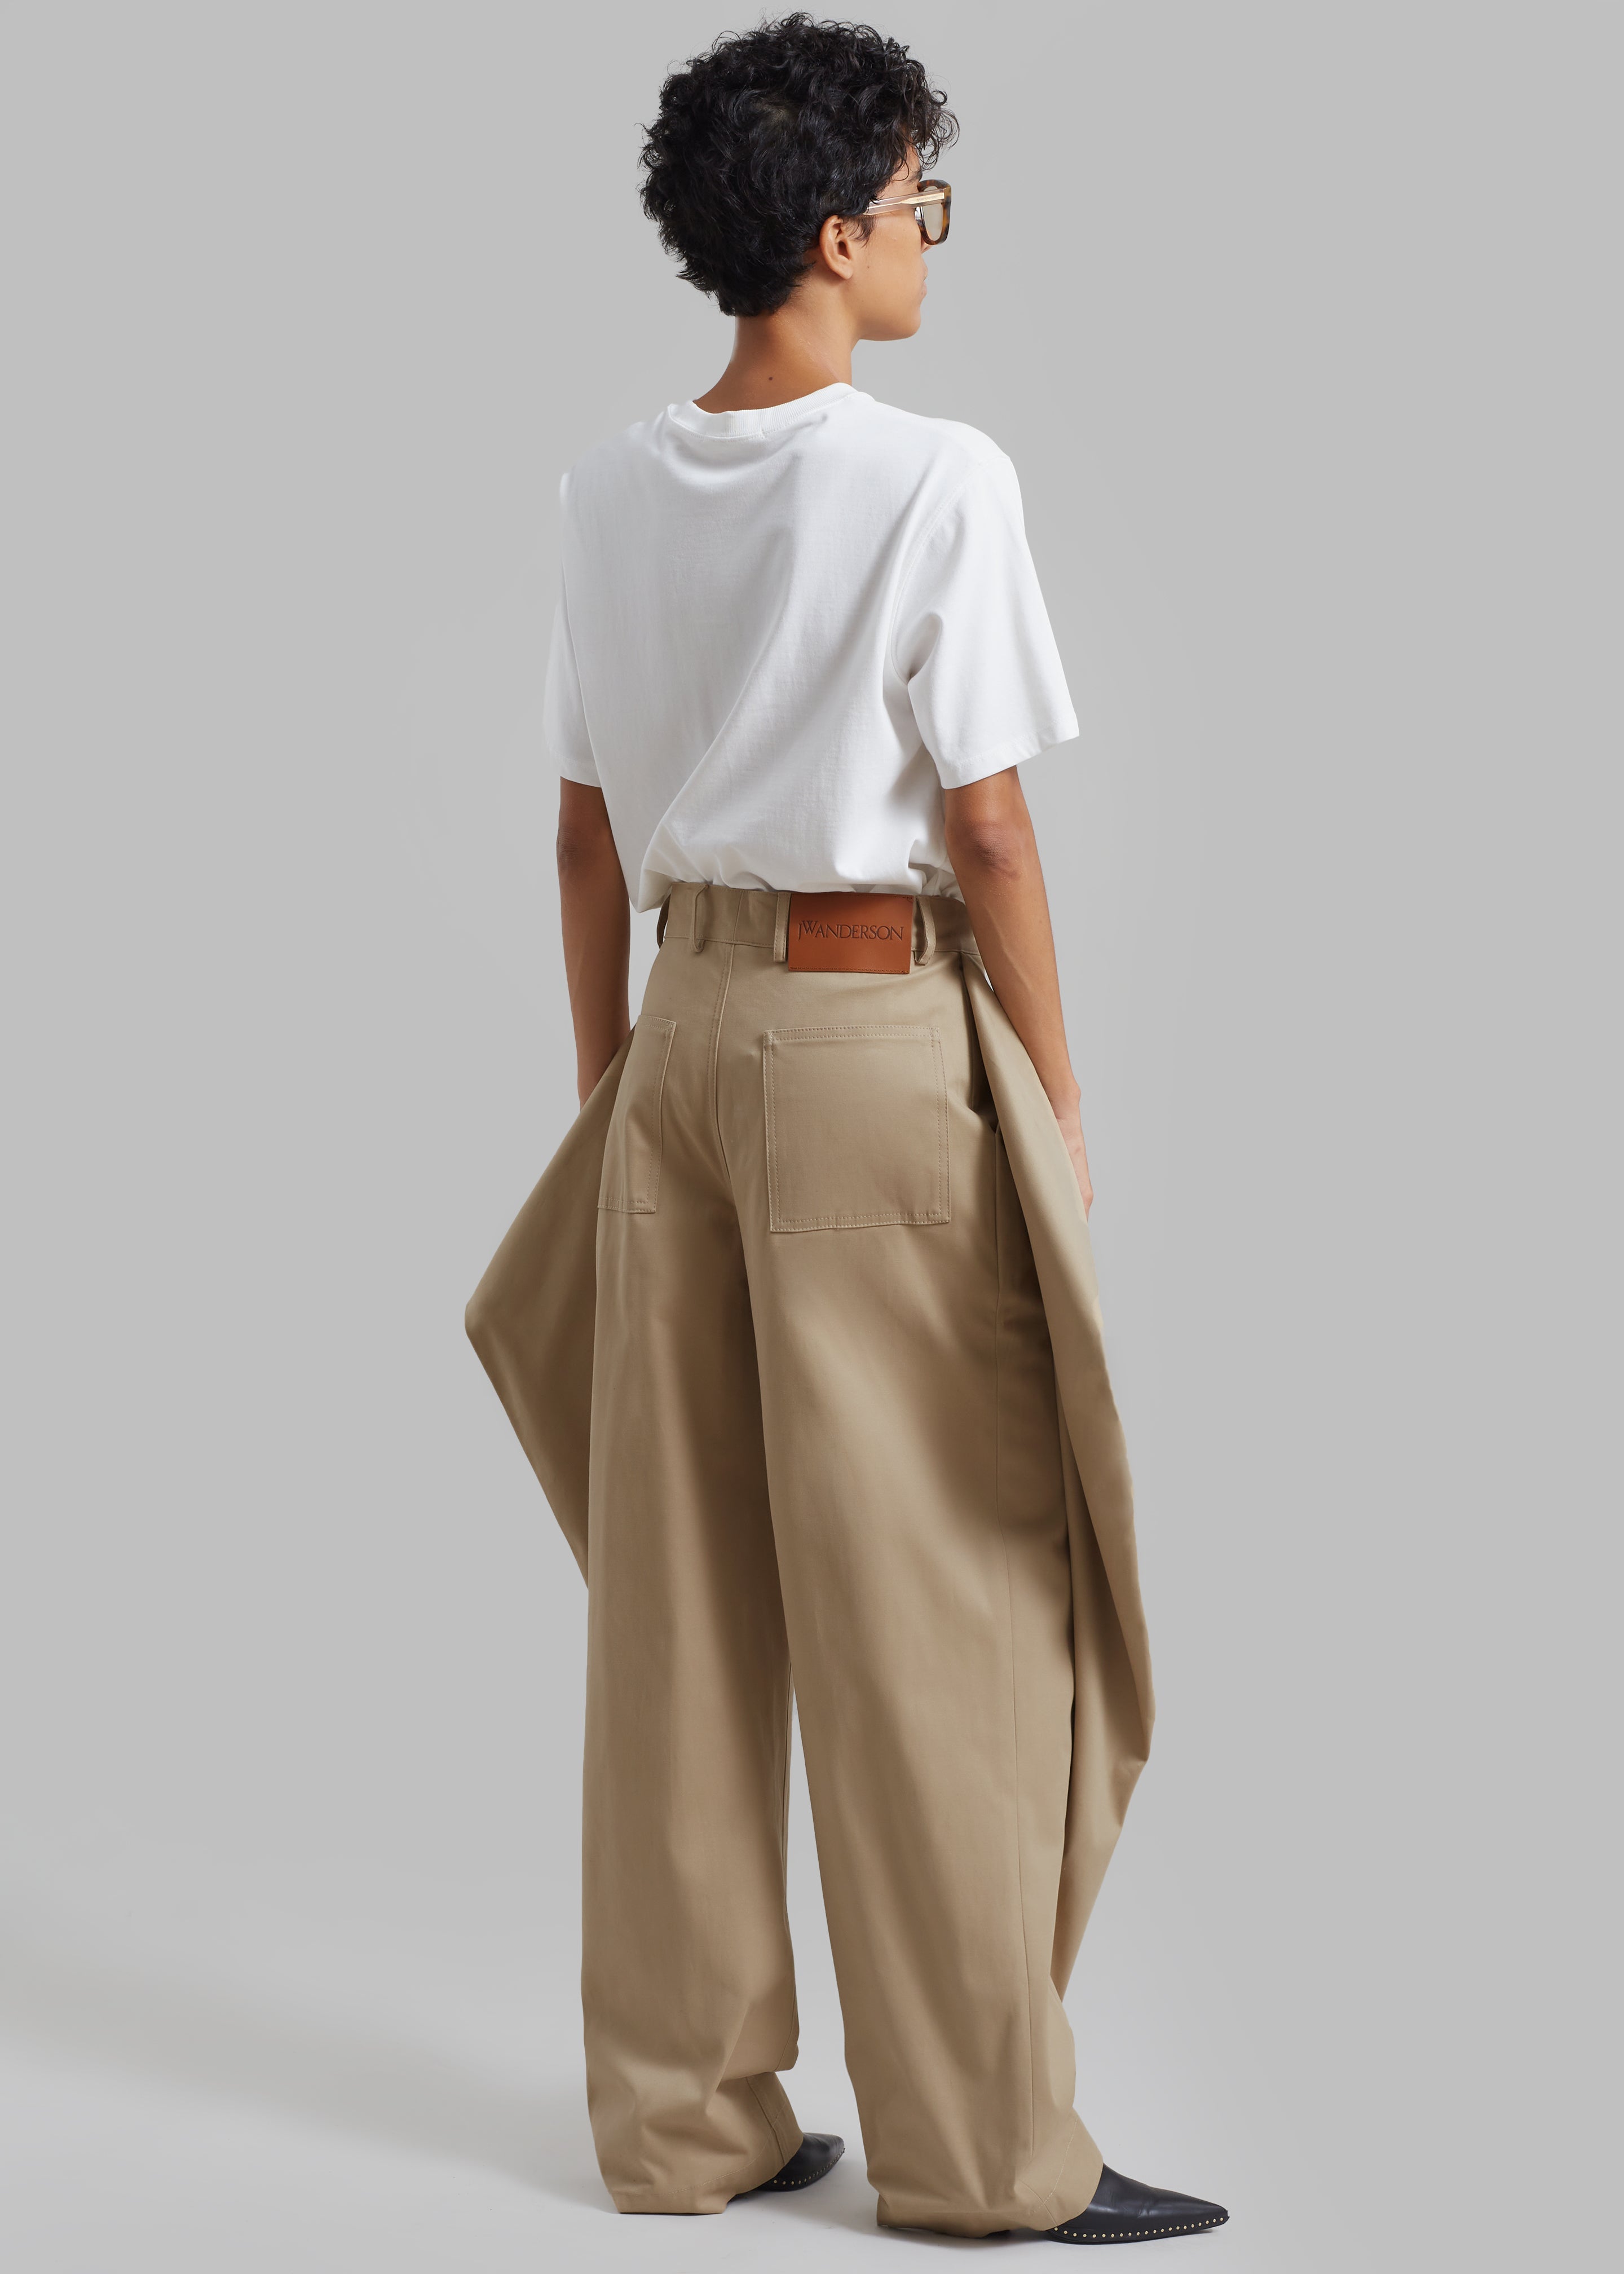 JW Anderson Kite Trousers - Flax - 8